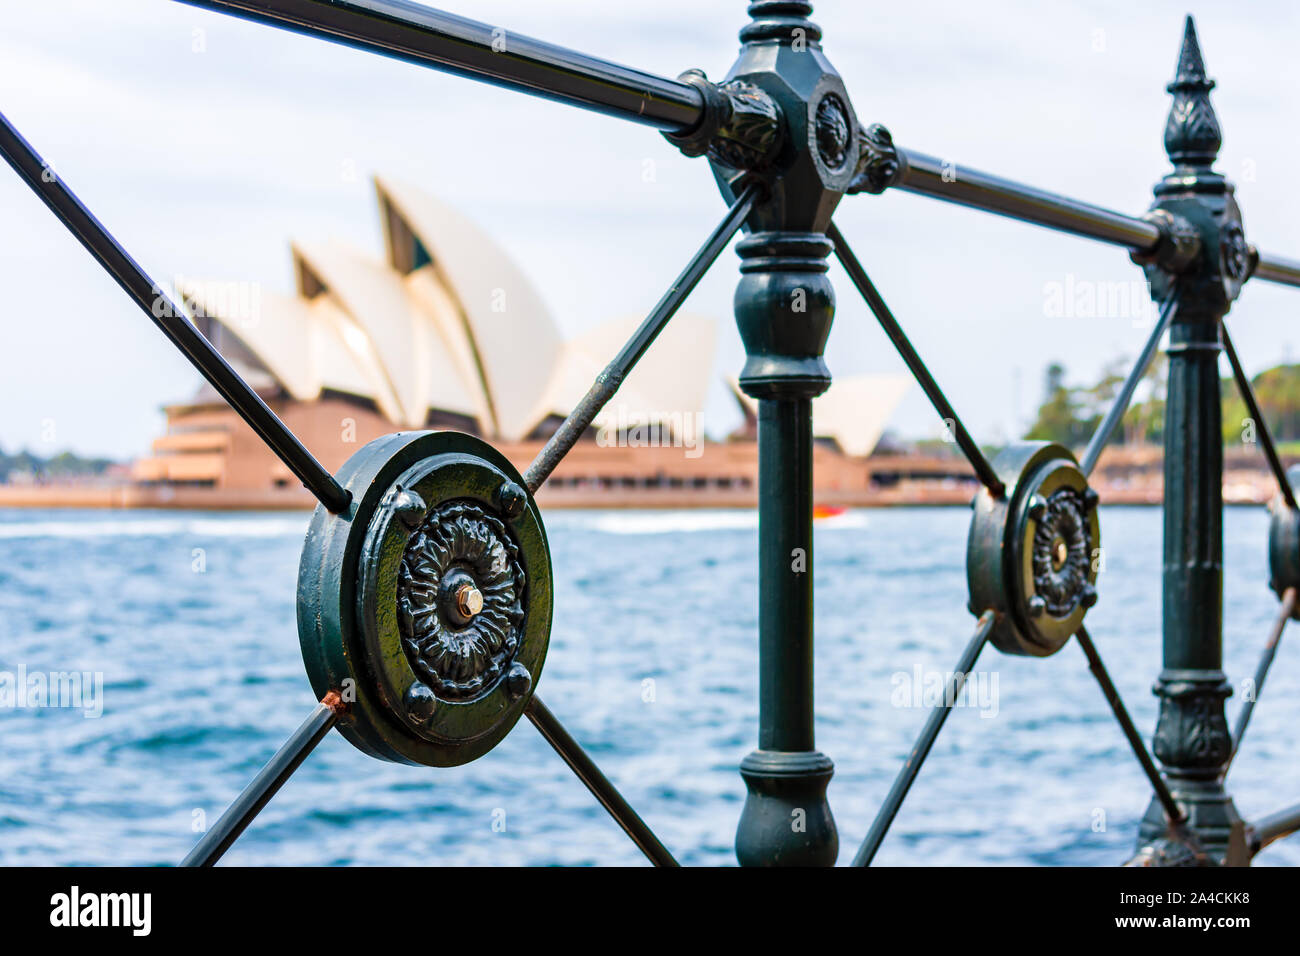 Sydney Harbor with the Opera House in the Background, looking through a fence Stock Photo